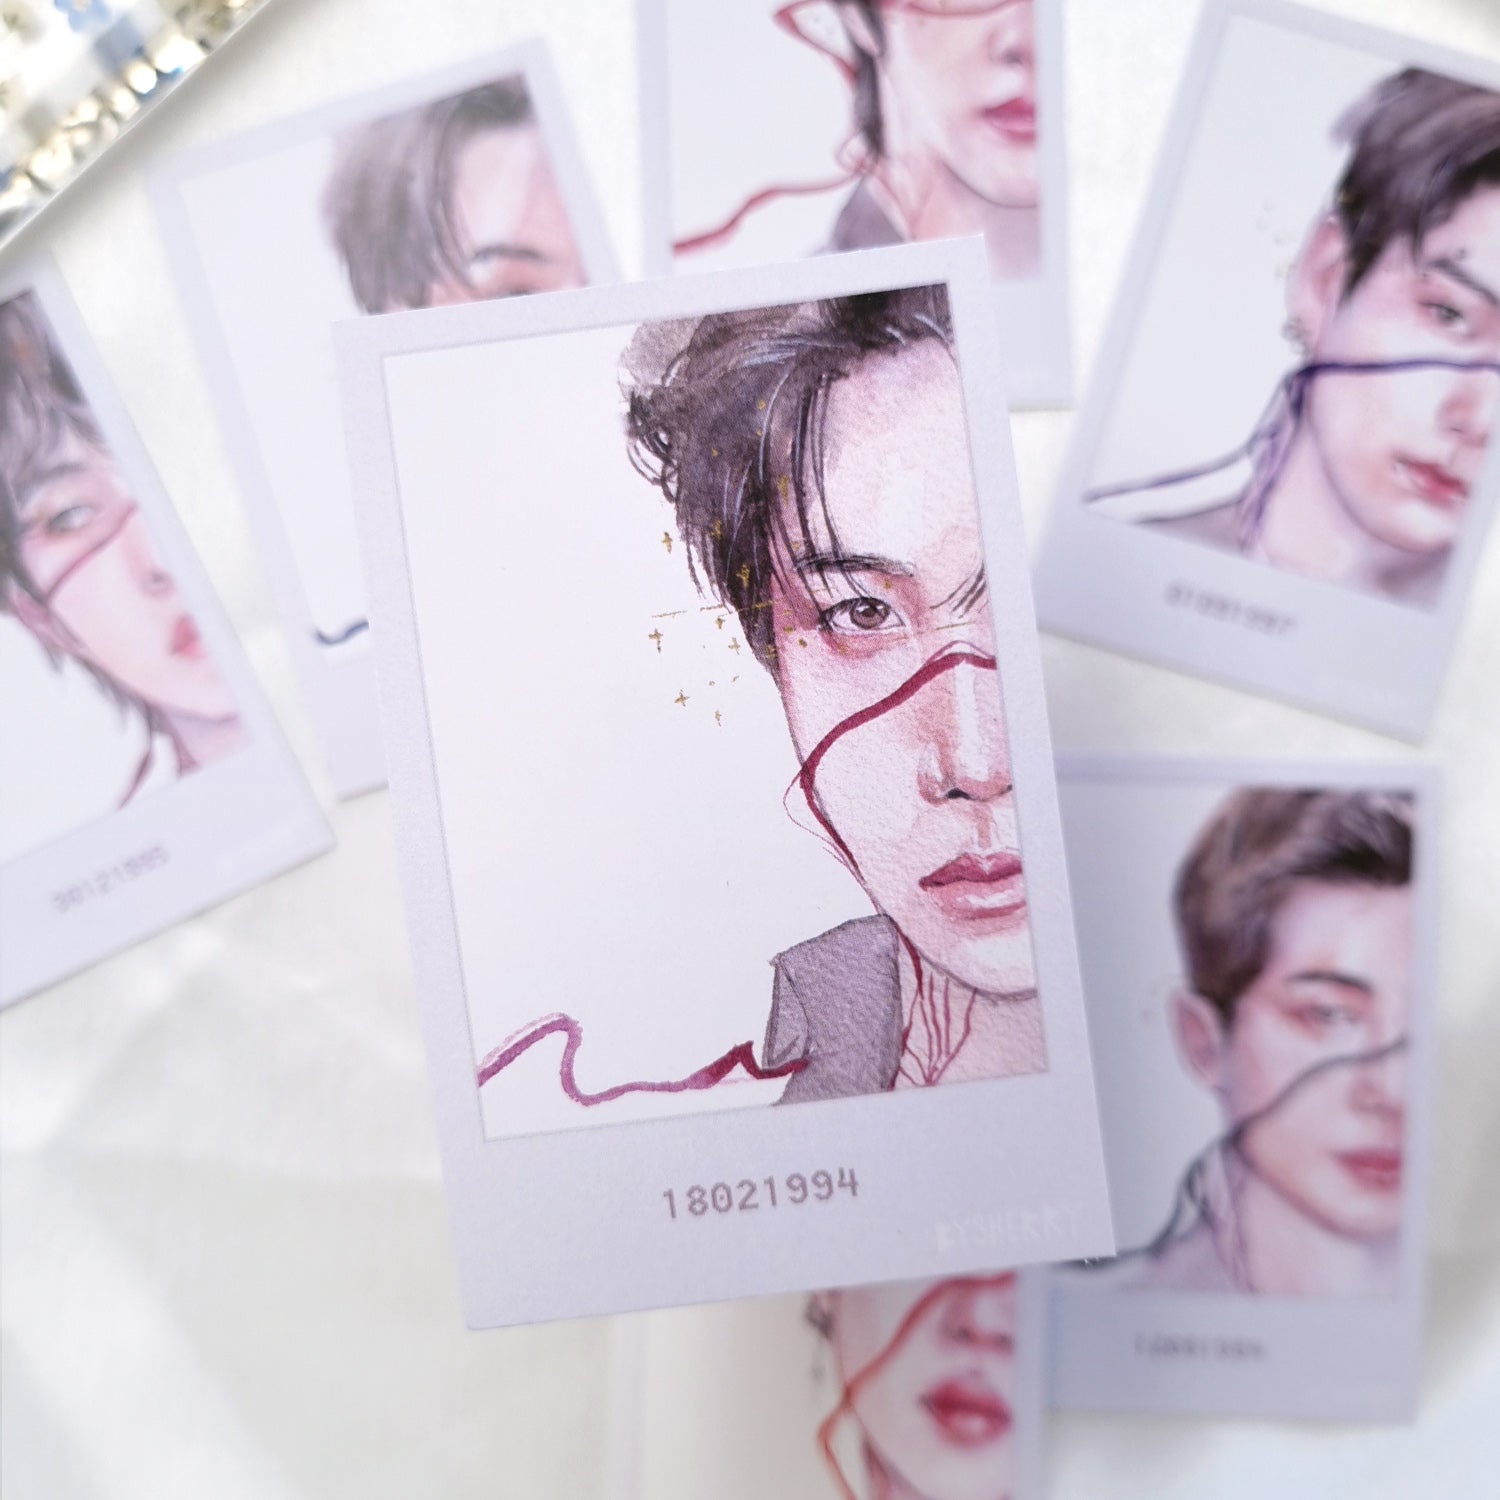 BTS "String of Fate" Aesthetic Photocard-style Art Prints - Set of 7